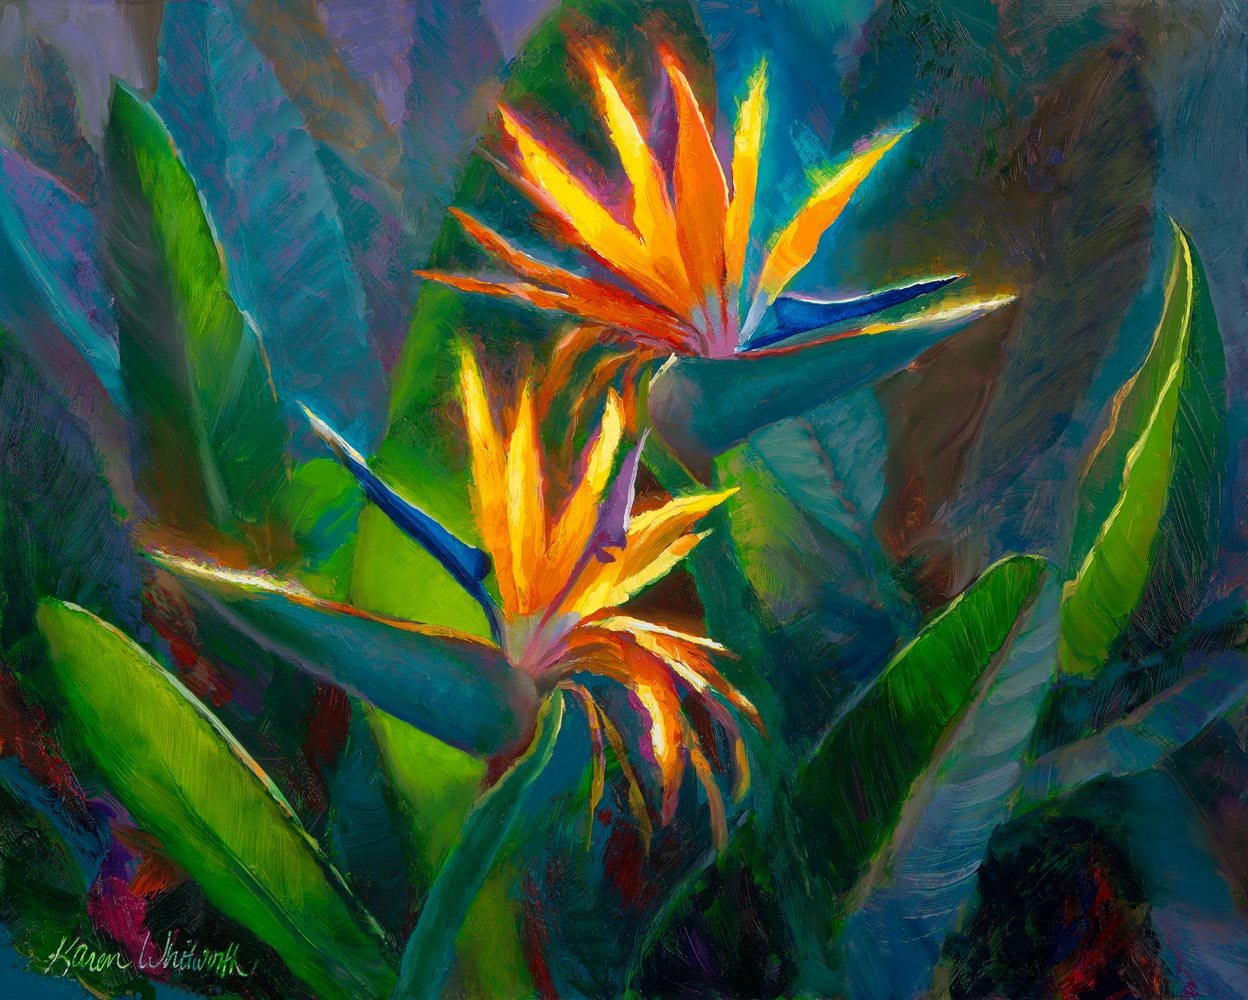 Colorful bird of paradise wall art painting of 2 bird of paradise flowers against a green and blue leaf background. 